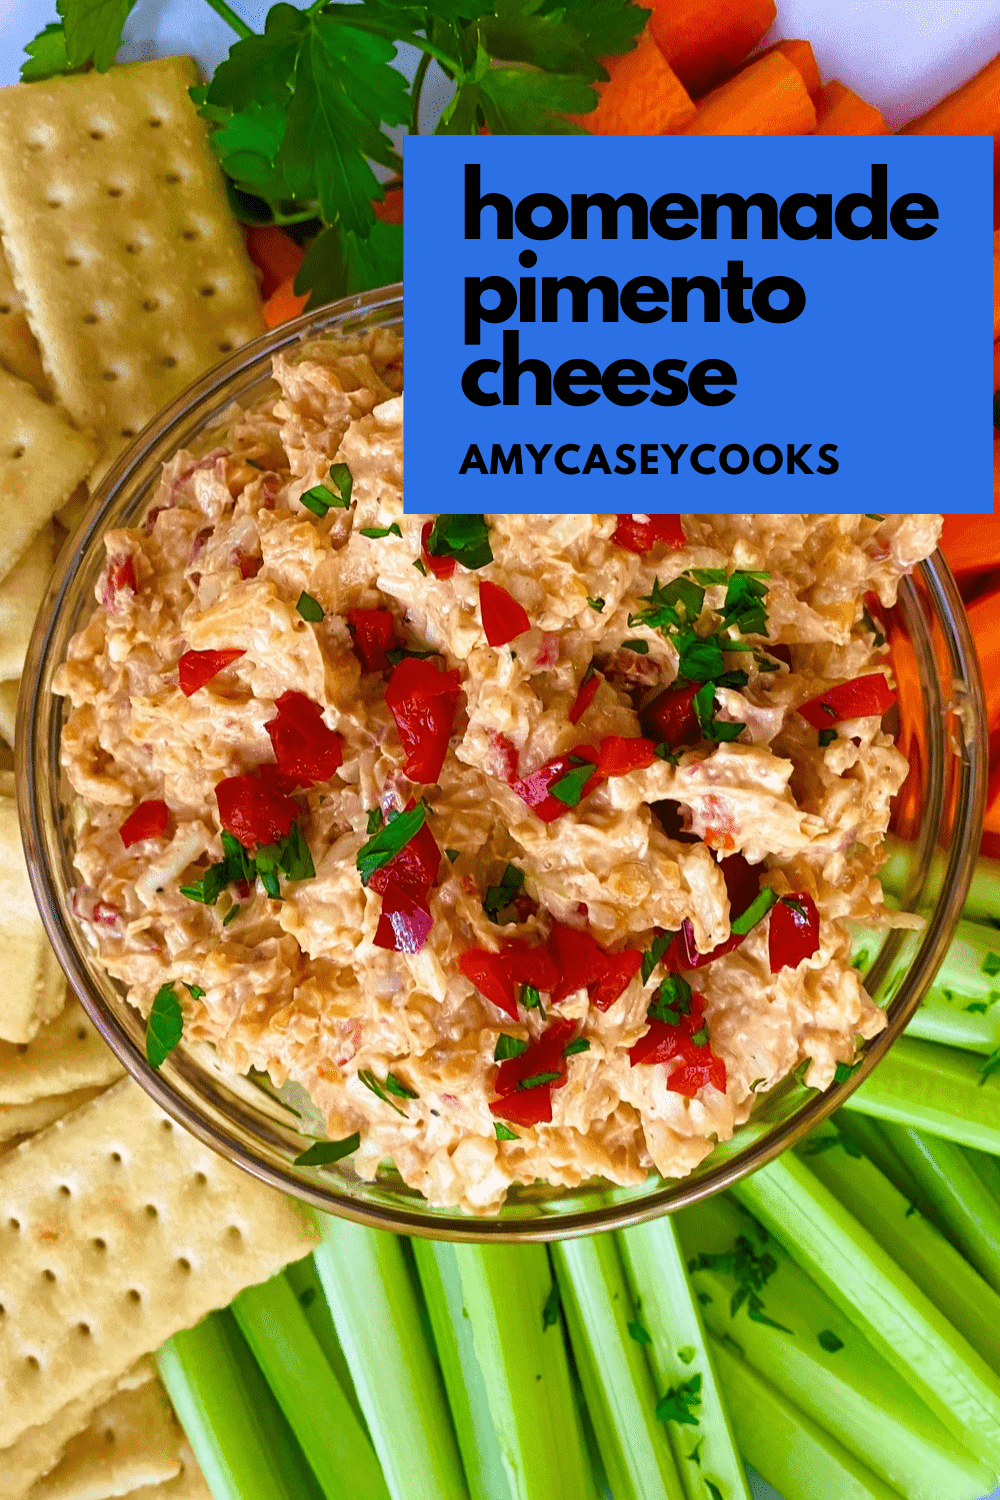 bowl of pimento cheese with celery, carrots and crackers